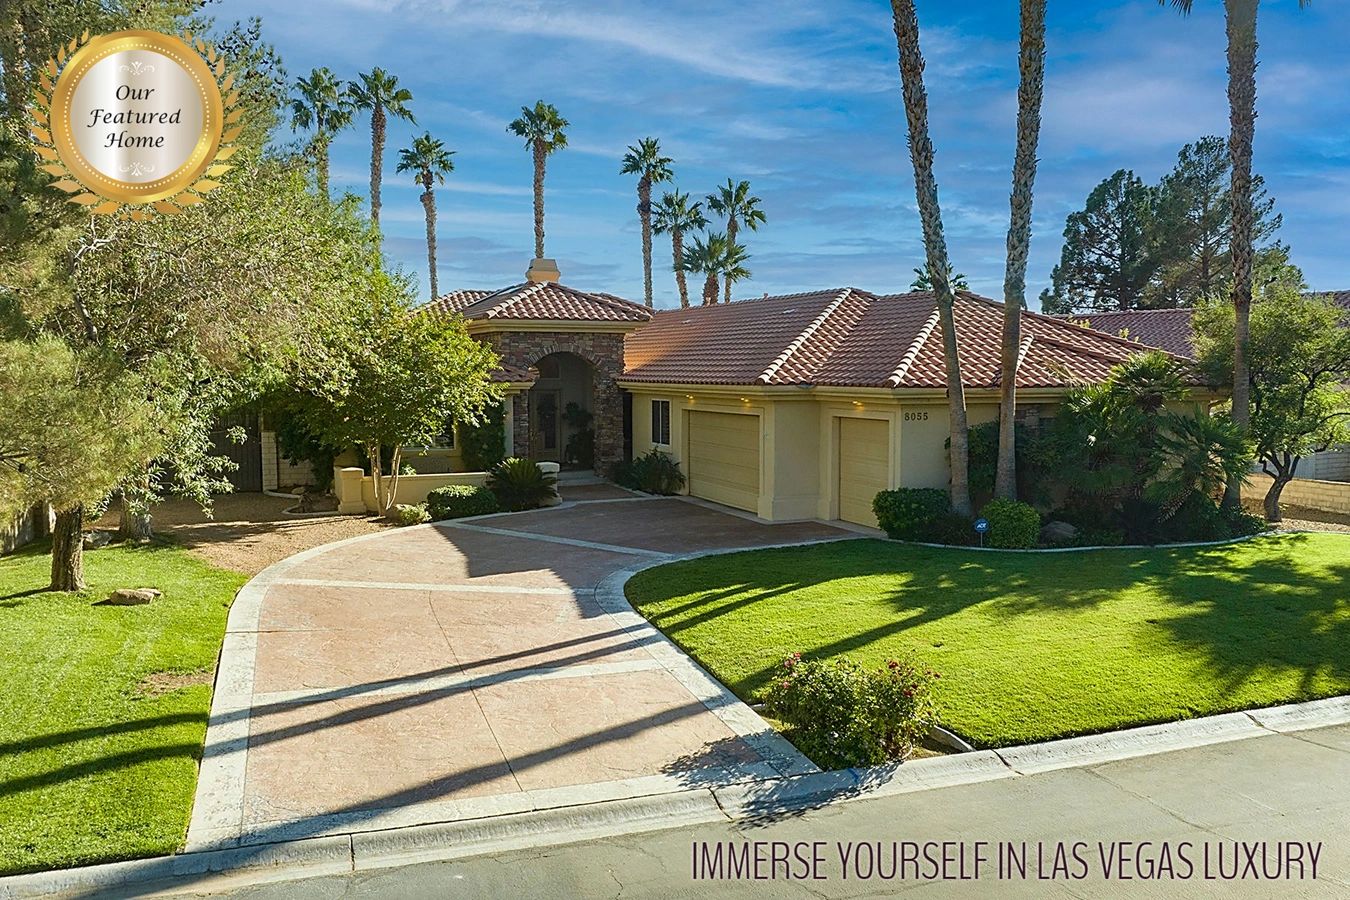 Single level stucco stone home 3-car garage curved driveway tall palm trees grass front yard